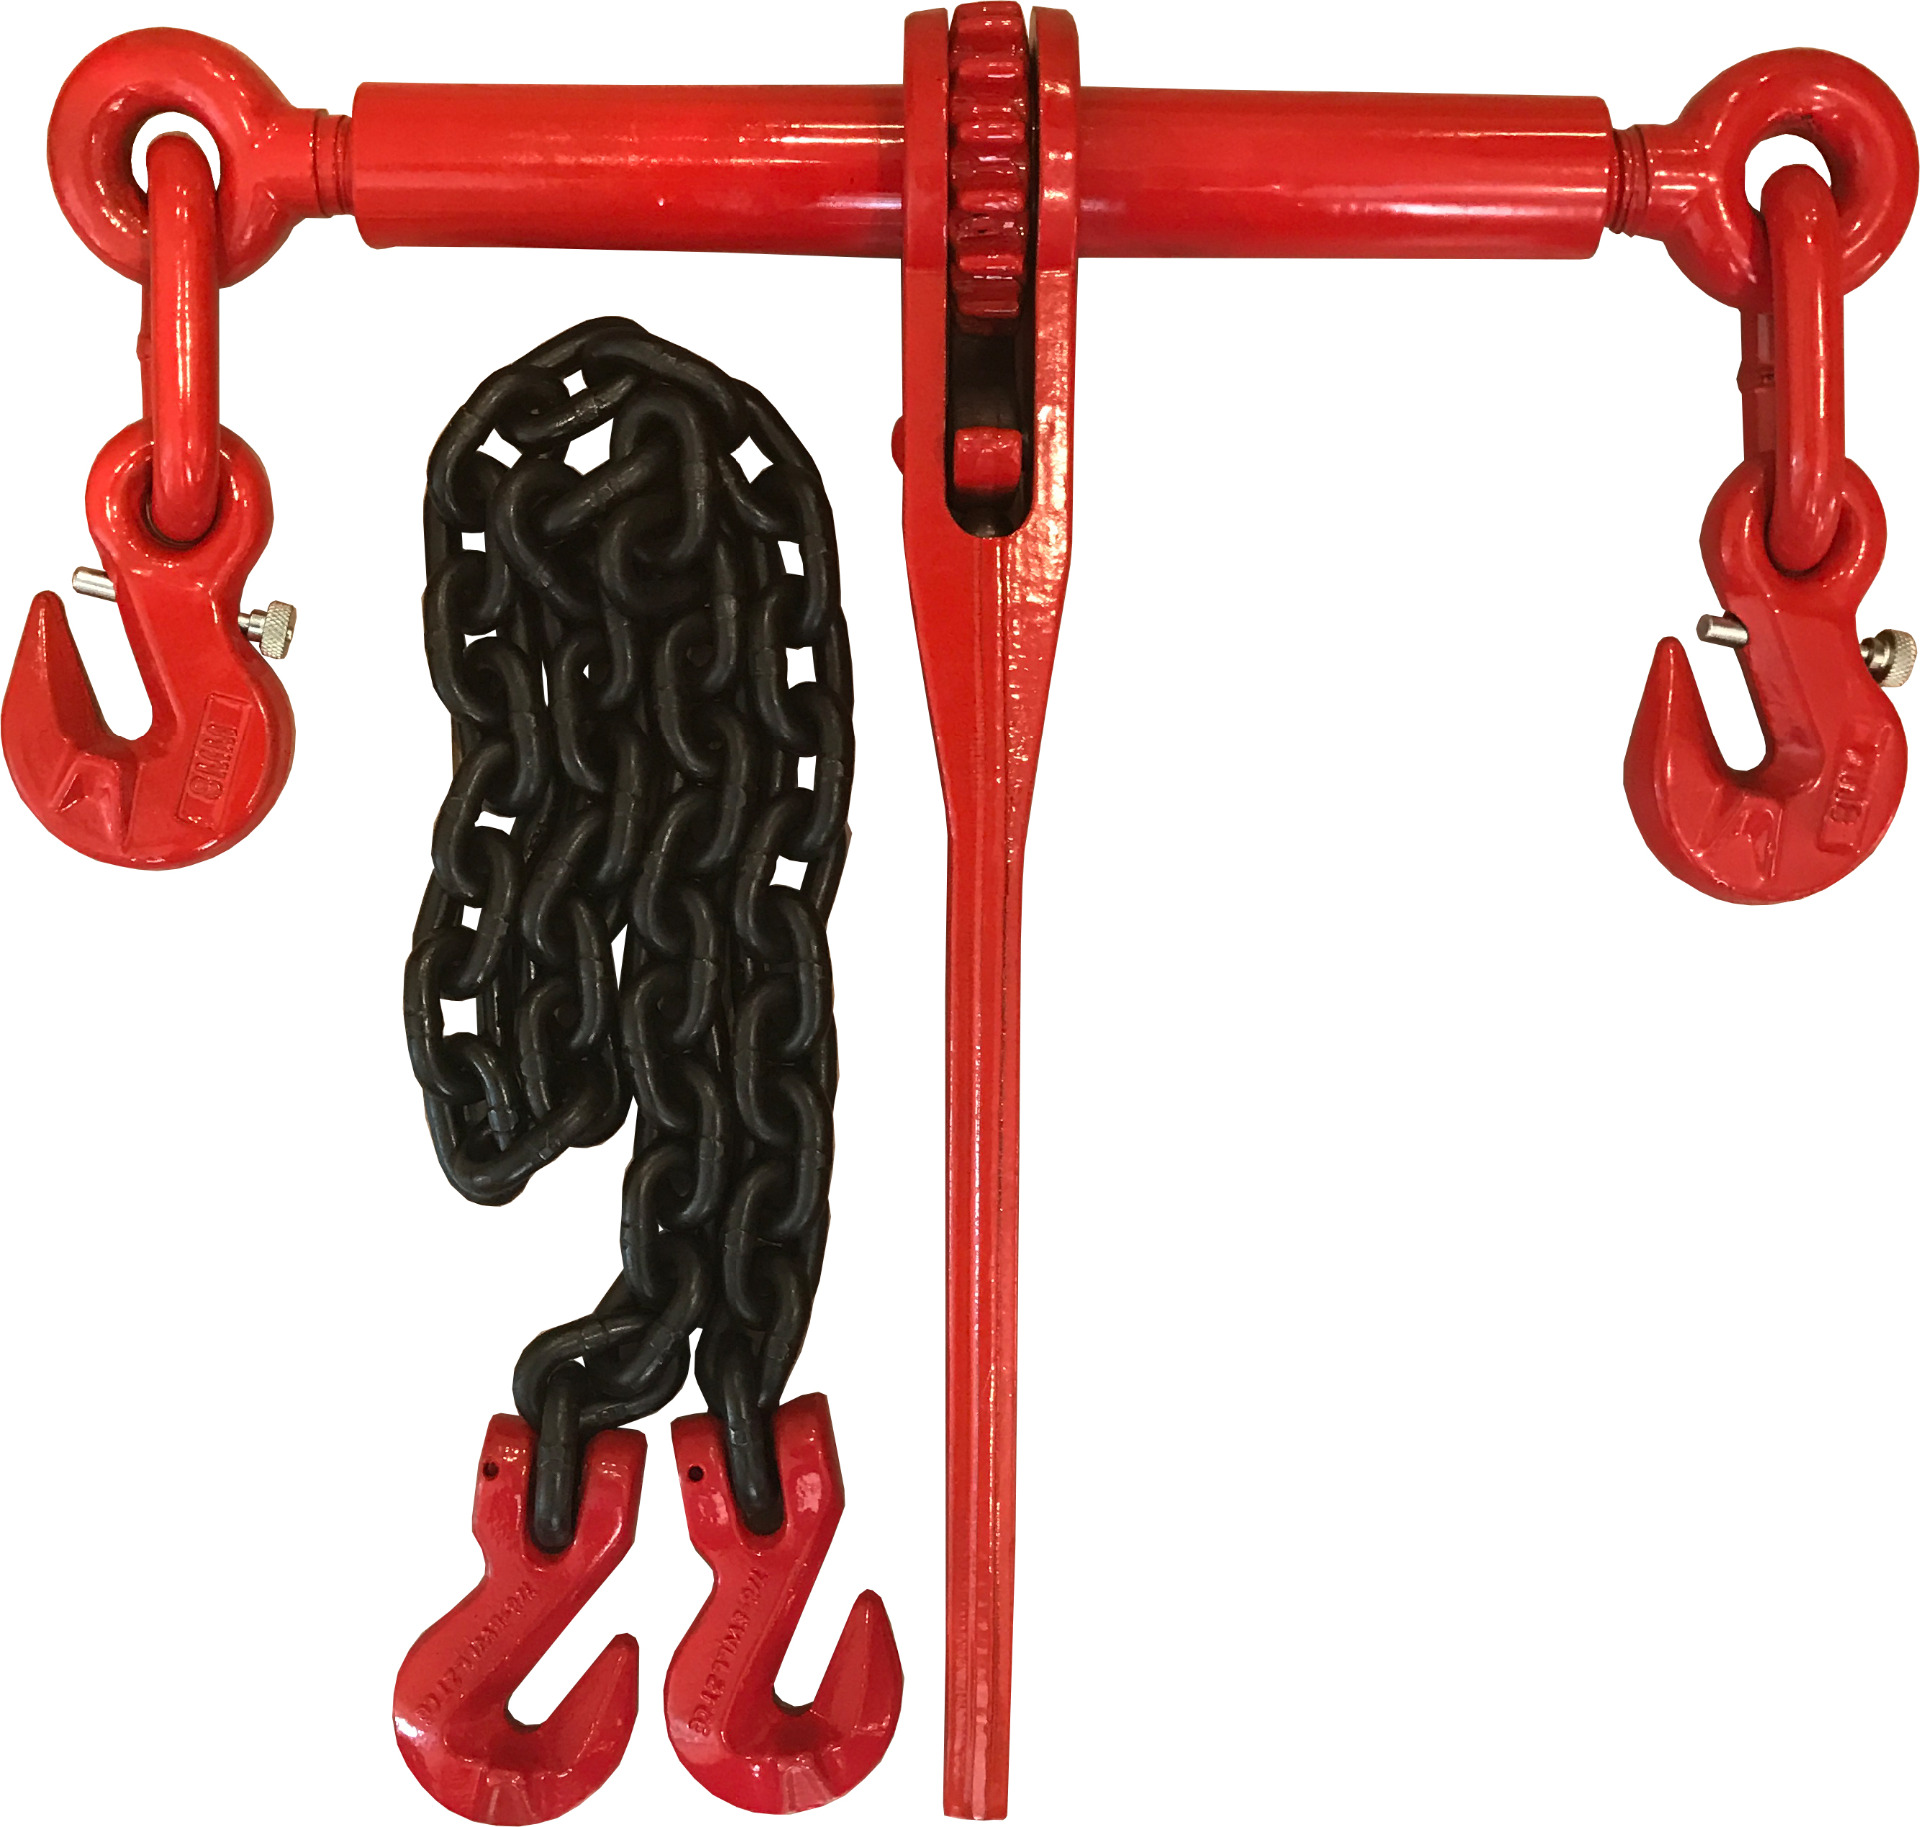 Load Binder and Lashing Chains